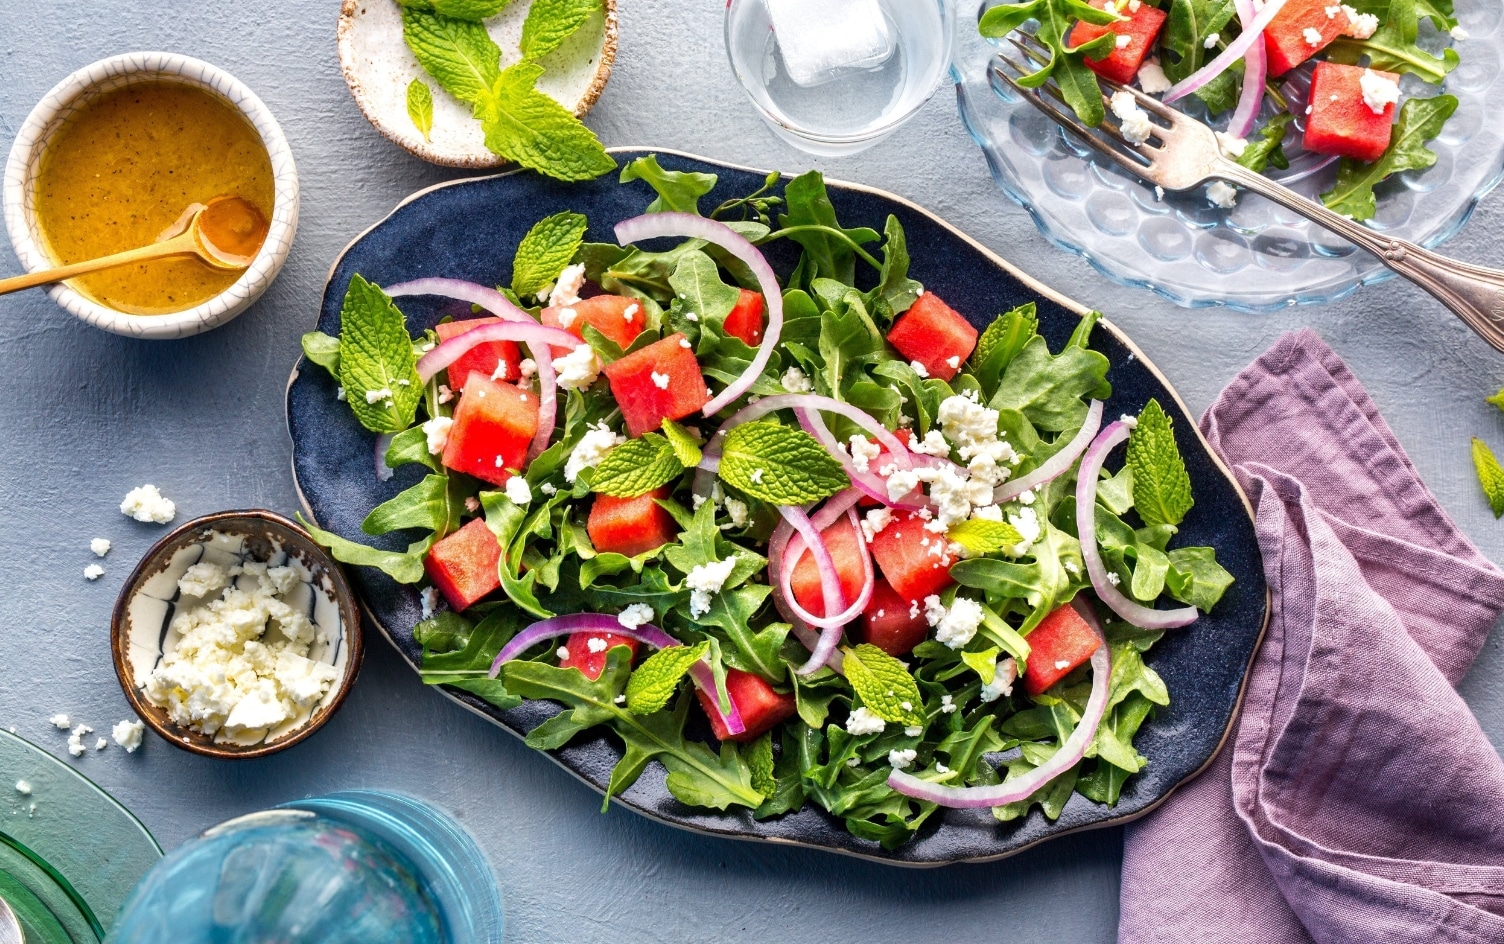 8 30-Minute Picnic Side Dishes Under 280 Calories | MyFitnessPal